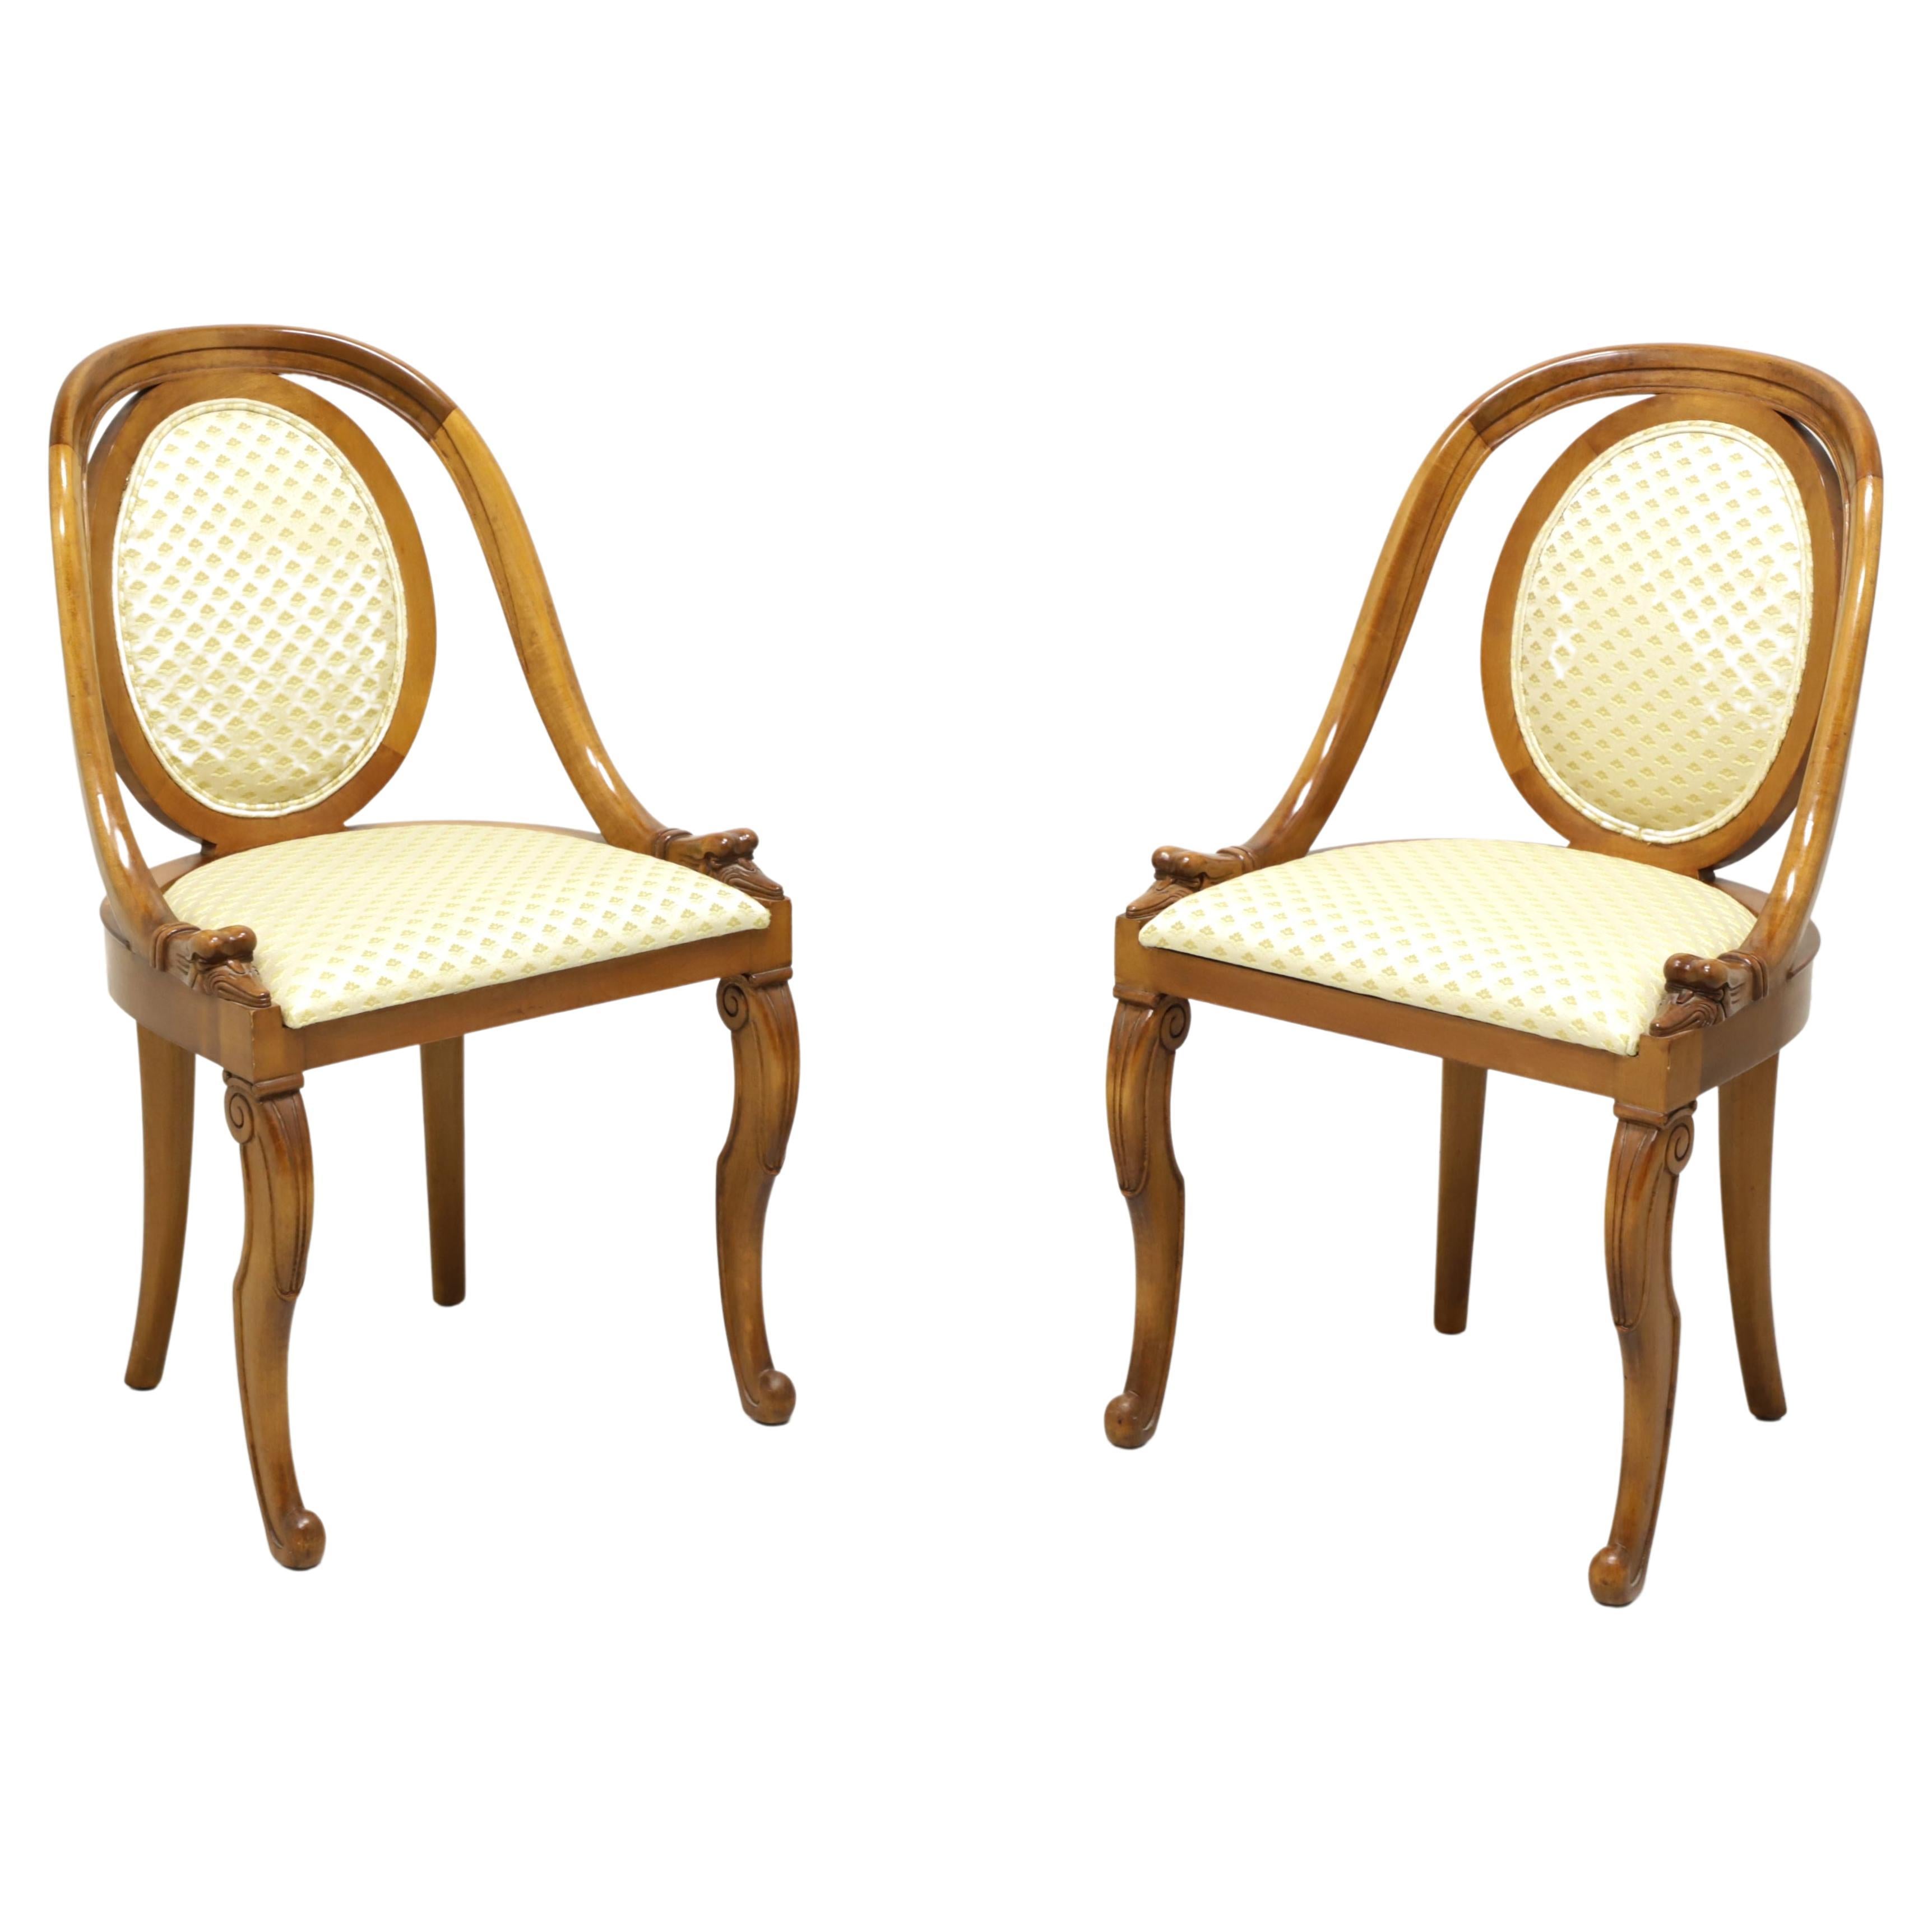 1920's French Art Deco Goosehead Dining Chairs - Pair C For Sale